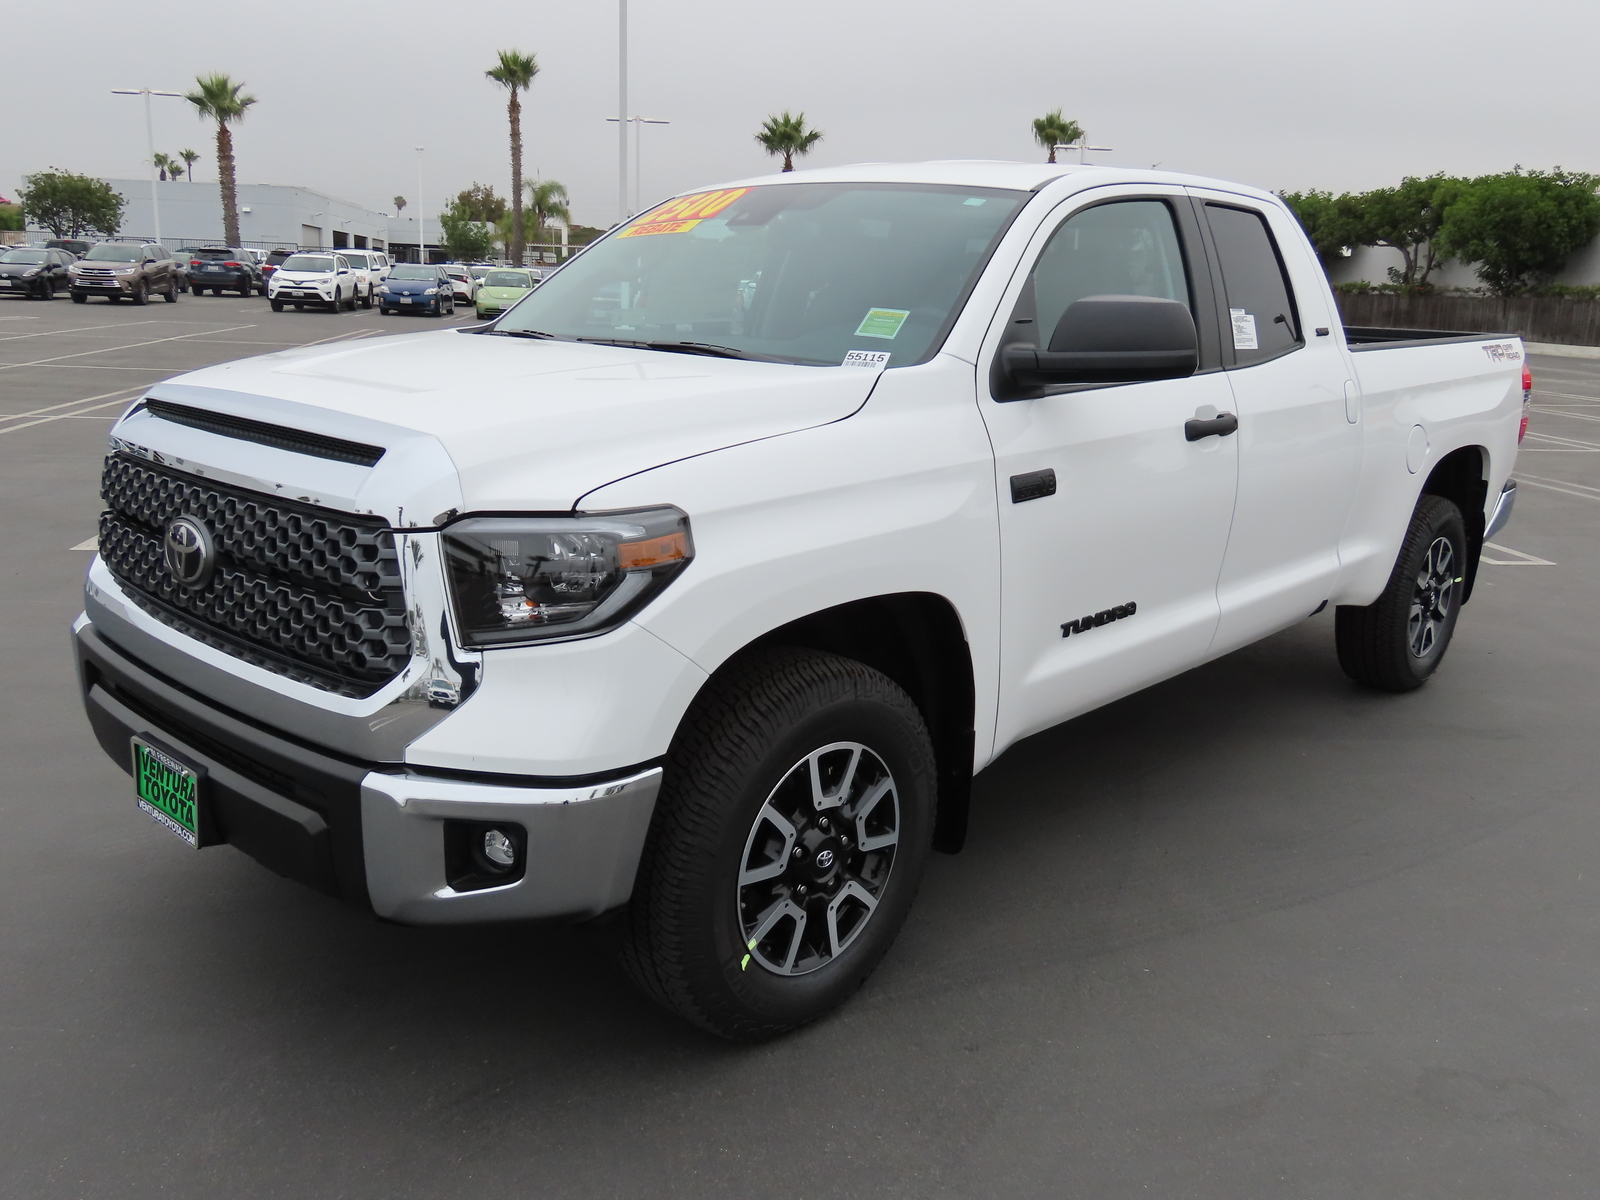 New 2020 Toyota Tundra SR5 Double Cab 6.5' Bed 5.7L Crew Cab Pickup in